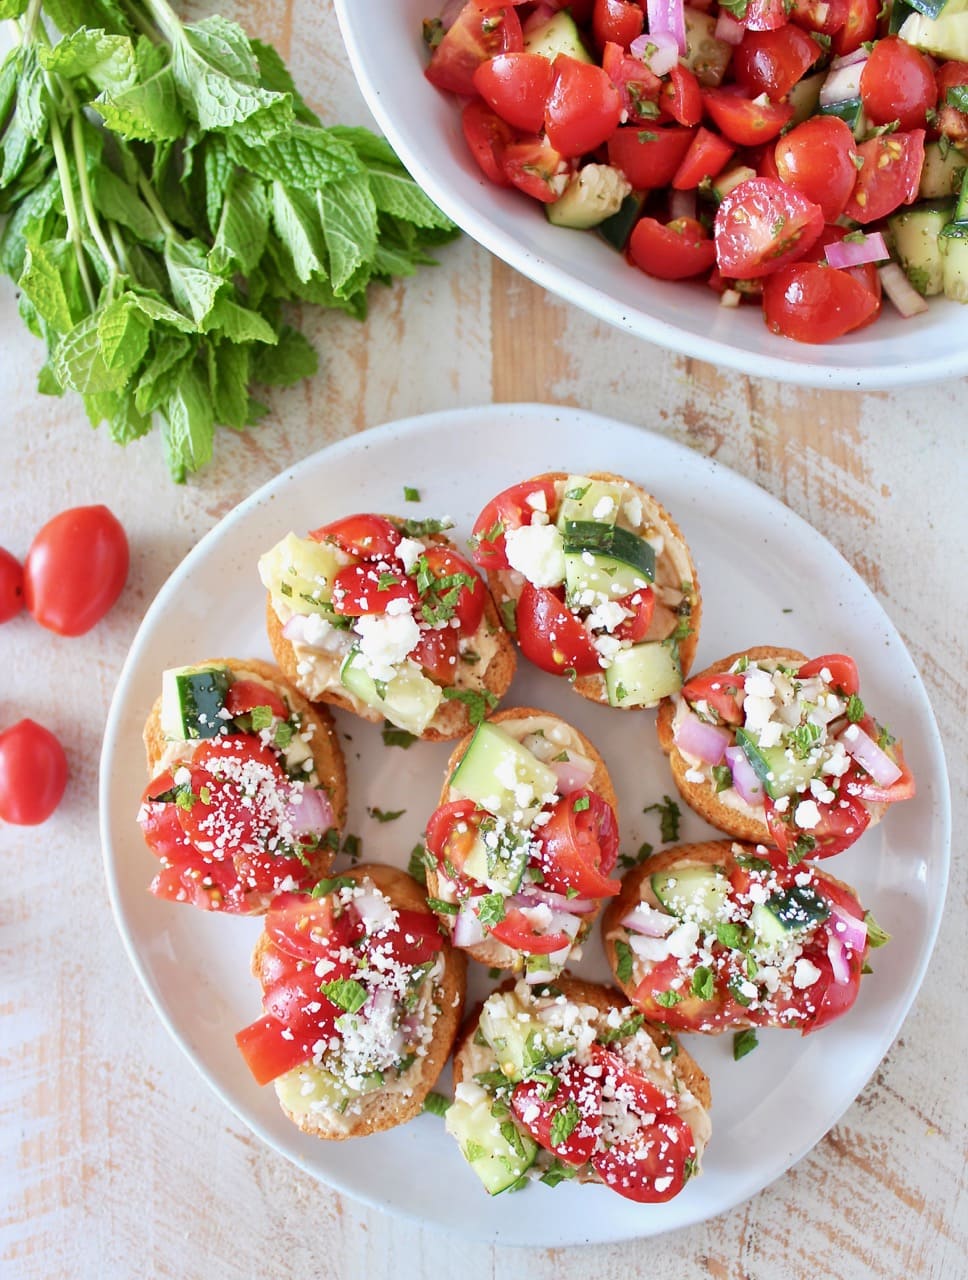 Tomato Cucumber Greek Bruschetta on Toasted Bread, topped with Garlic Hummus and Feta Cheese